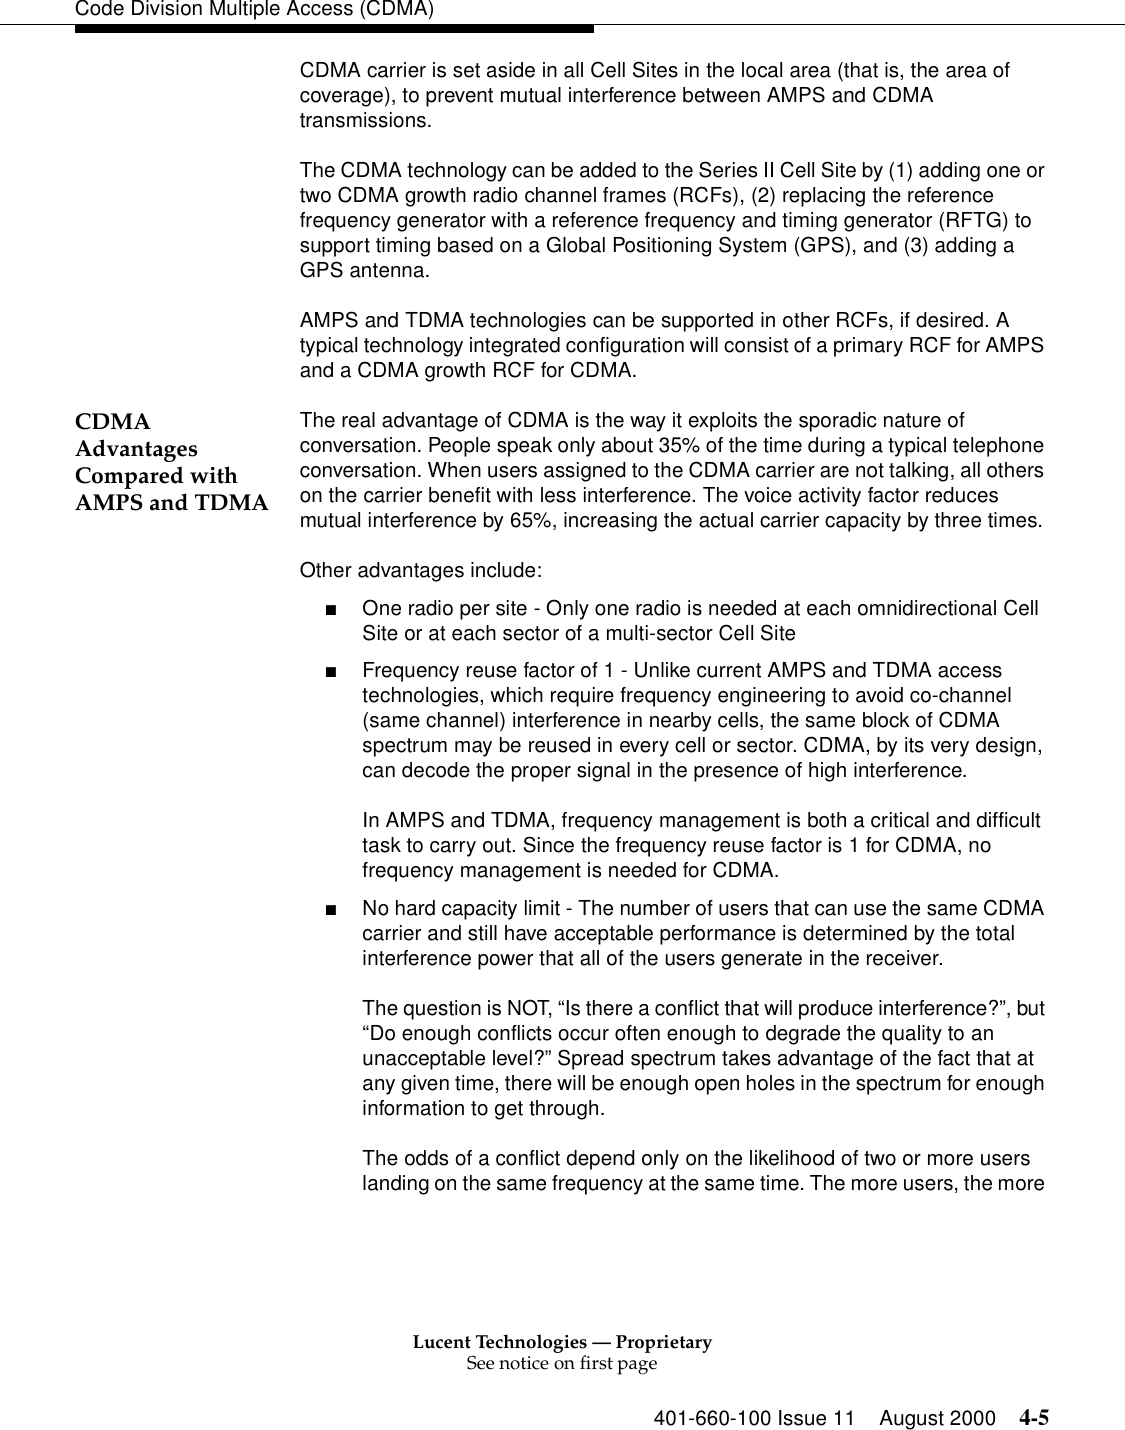 Lucent Technologies — ProprietarySee notice on first page401-660-100 Issue 11 August 2000 4-5Code Division Multiple Access (CDMA)CDMA carrier is set aside in all Cell Sites in the local area (that is, the area of coverage), to prevent mutual interference between AMPS and CDMA transmissions.The CDMA technology can be added to the Series II Cell Site by (1) adding one or two CDMA growth radio channel frames (RCFs), (2) replacing the reference frequency generator with a reference frequency and timing generator (RFTG) to support timing based on a Global Positioning System (GPS), and (3) adding a GPS antenna.AMPS and TDMA technologies can be supported in other RCFs, if desired. A typical technology integrated configuration will consist of a primary RCF for AMPS and a CDMA growth RCF for CDMA.CDMA Advantages Compared with AMPS and TDMAThe real advantage of CDMA is the way it exploits the sporadic nature of conversation. People speak only about 35% of the time during a typical telephone conversation. When users assigned to the CDMA carrier are not talking, all others on the carrier benefit with less interference. The voice activity factor reduces mutual interference by 65%, increasing the actual carrier capacity by three times.Other advantages include:■One radio per site - Only one radio is needed at each omnidirectional Cell Site or at each sector of a multi-sector Cell Site■Frequency reuse factor of 1 - Unlike current AMPS and TDMA access technologies, which require frequency engineering to avoid co-channel (same channel) interference in nearby cells, the same block of CDMA spectrum may be reused in every cell or sector. CDMA, by its very design, can decode the proper signal in the presence of high interference.In AMPS and TDMA, frequency management is both a critical and difficult task to carry out. Since the frequency reuse factor is 1 for CDMA, no frequency management is needed for CDMA.■No hard capacity limit - The number of users that can use the same CDMA carrier and still have acceptable performance is determined by the total interference power that all of the users generate in the receiver. The question is NOT, “Is there a conflict that will produce interference?”, but “Do enough conflicts occur often enough to degrade the quality to an unacceptable level?” Spread spectrum takes advantage of the fact that at any given time, there will be enough open holes in the spectrum for enough information to get through.The odds of a conflict depend only on the likelihood of two or more users landing on the same frequency at the same time. The more users, the more 